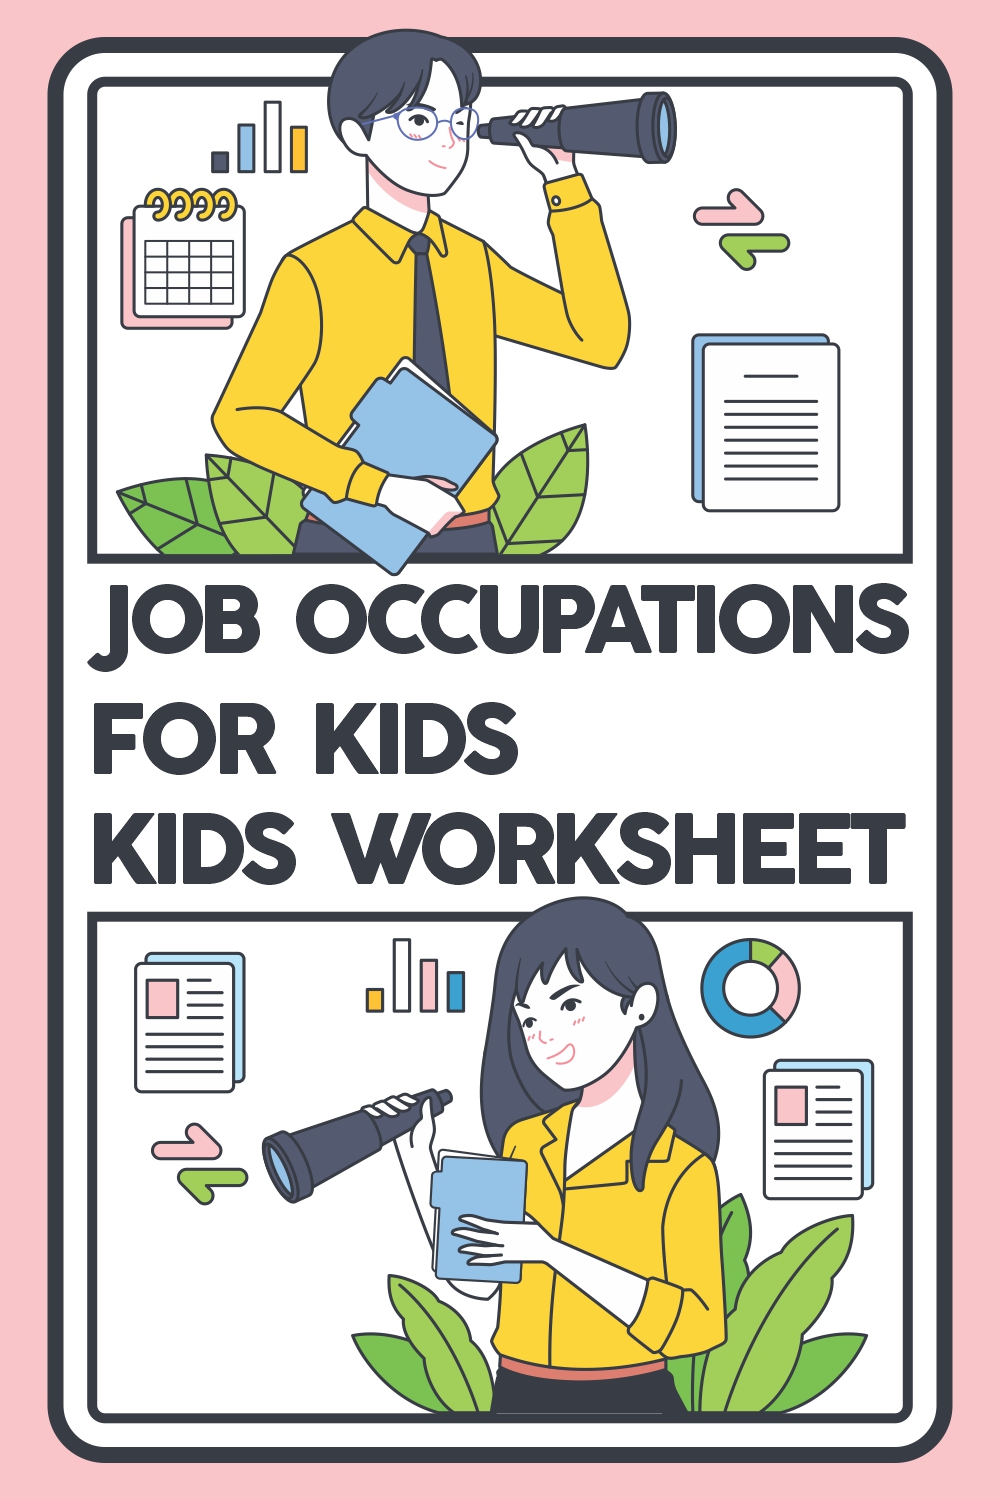 Jobs Occupations for Kids Worksheets